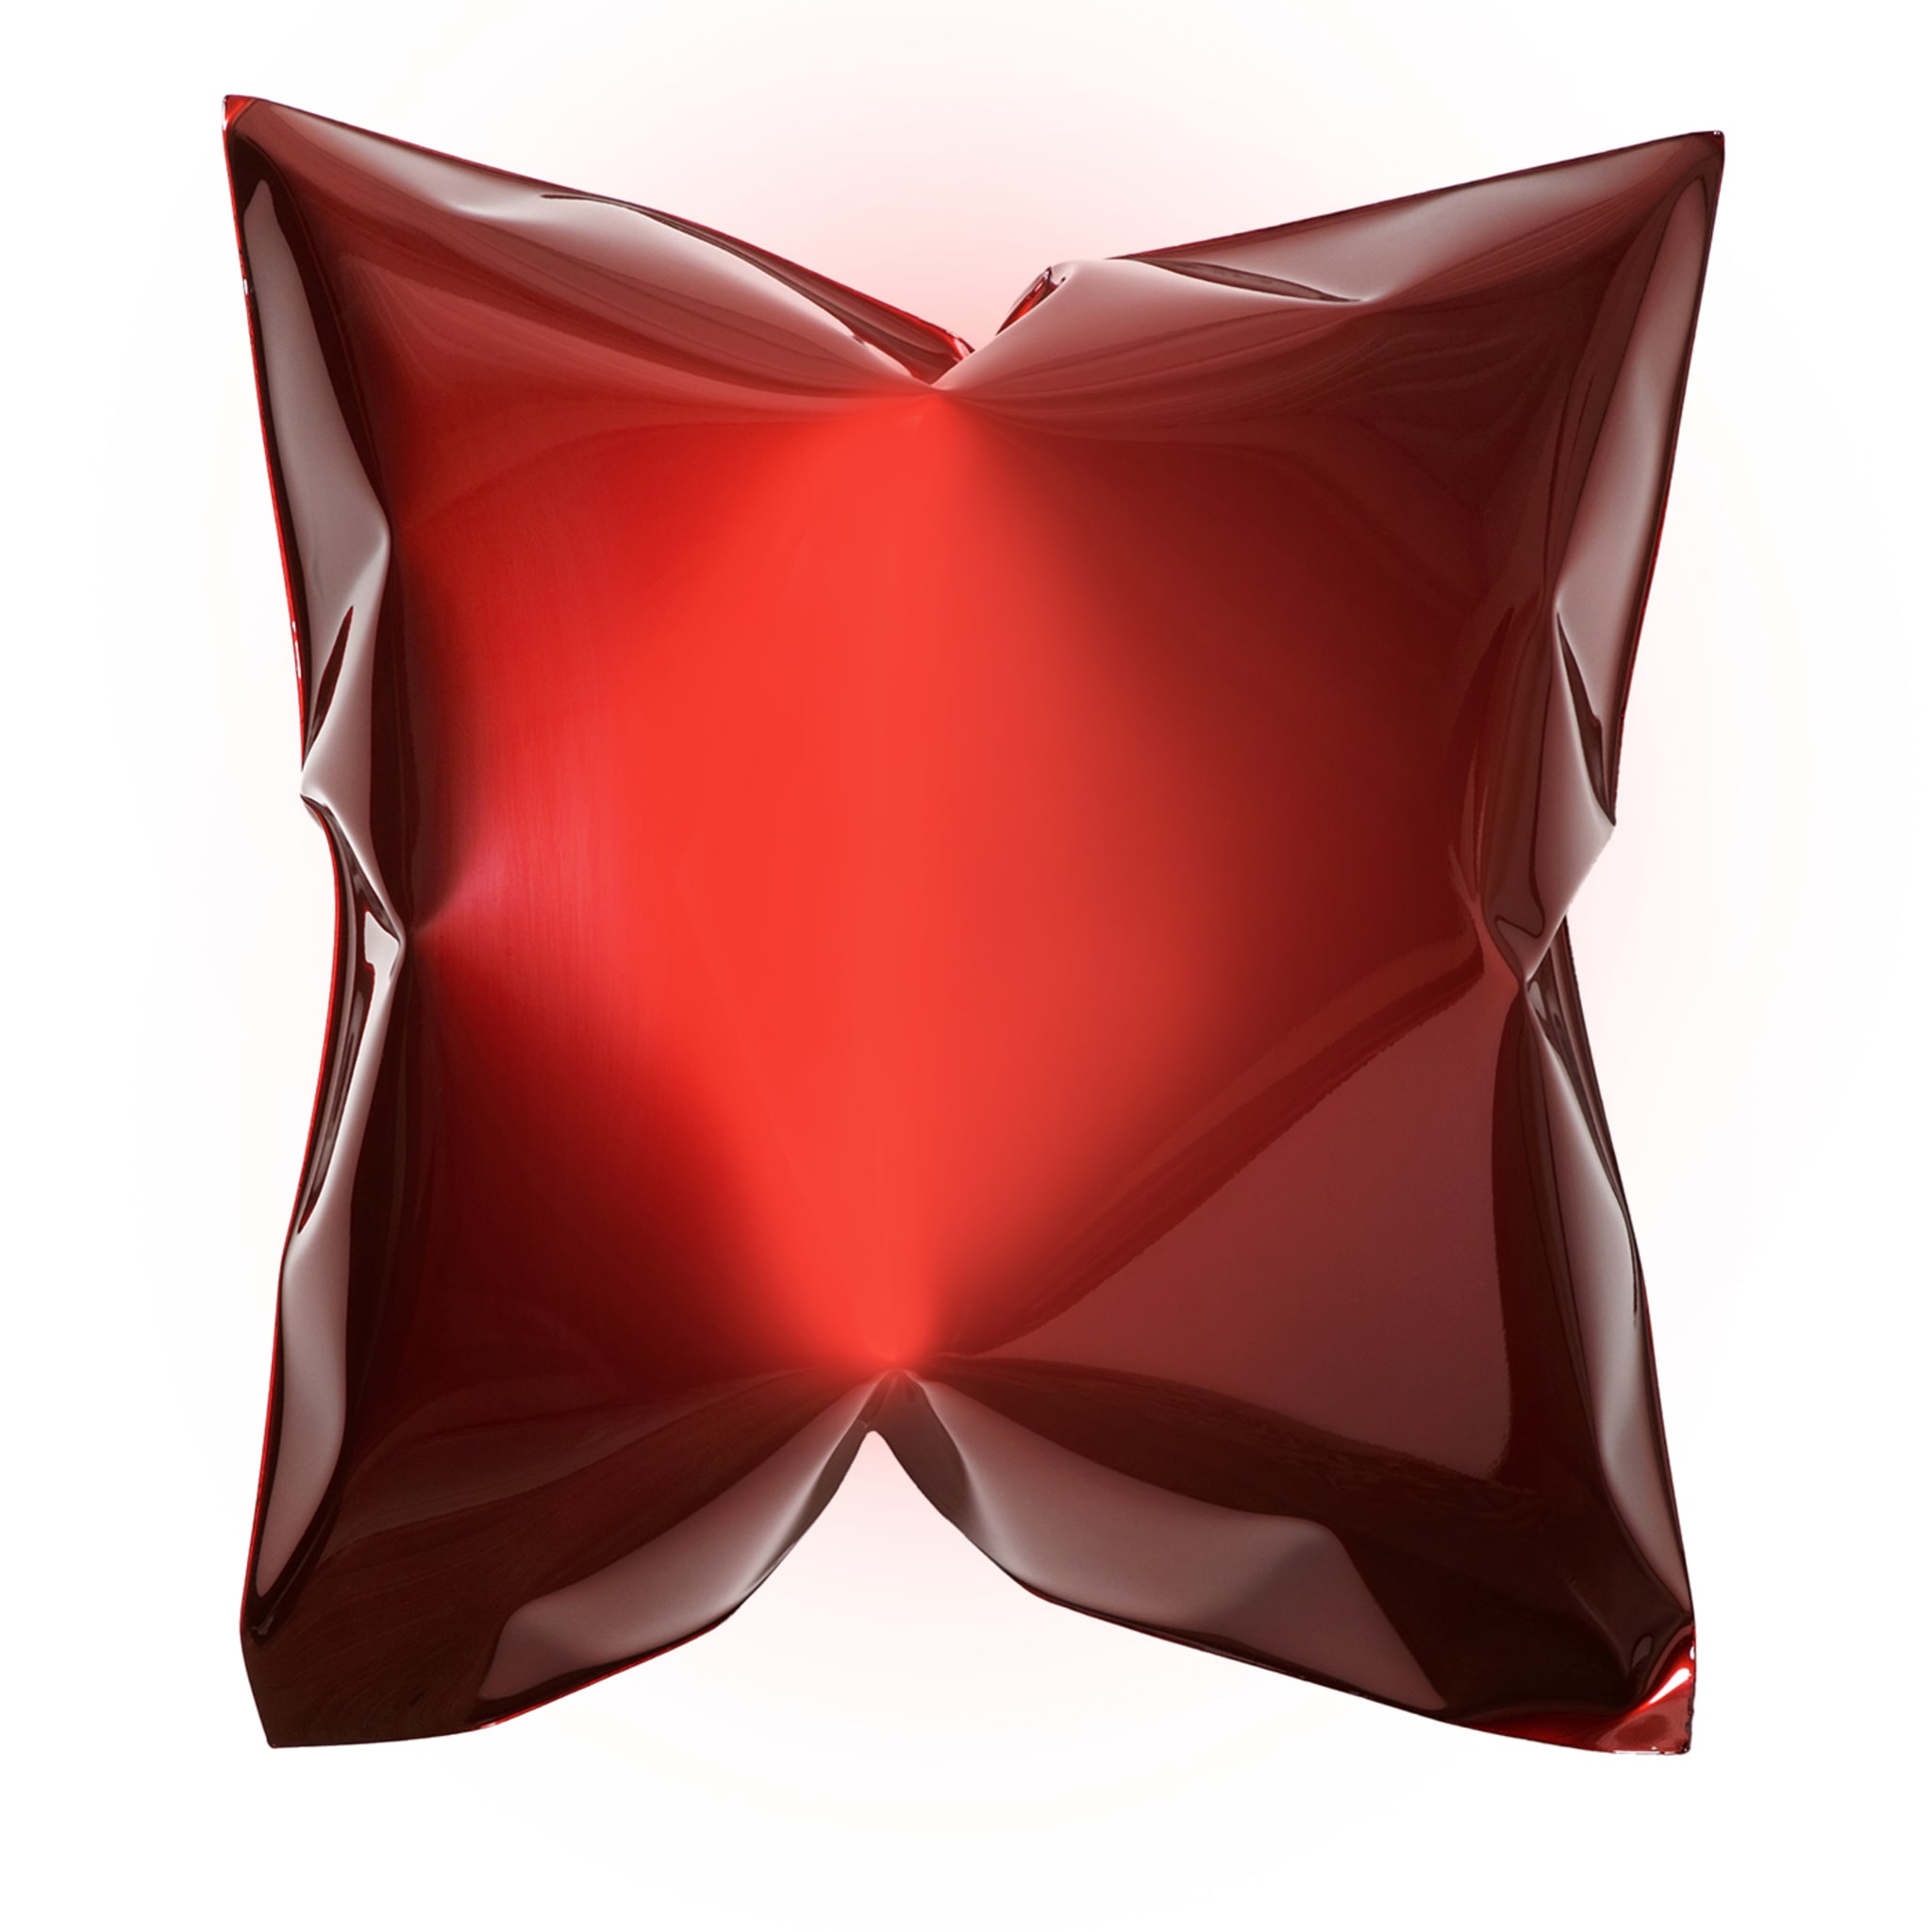 Square Red Pillow-Shaped Wall Sculpture #2 - Main view